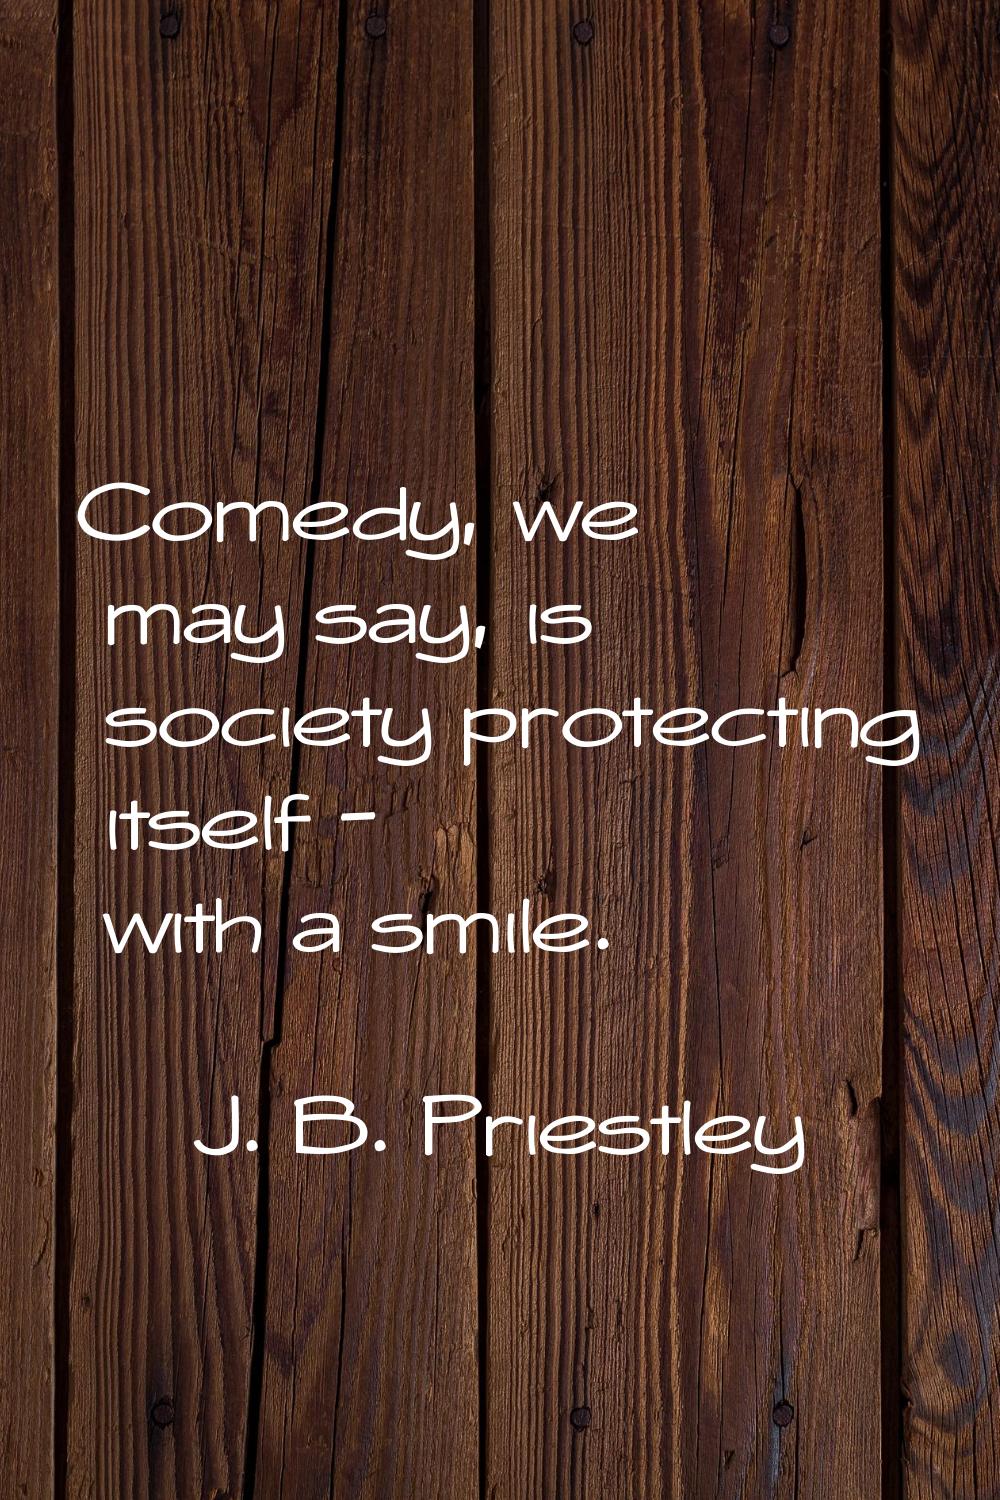 Comedy, we may say, is society protecting itself - with a smile.